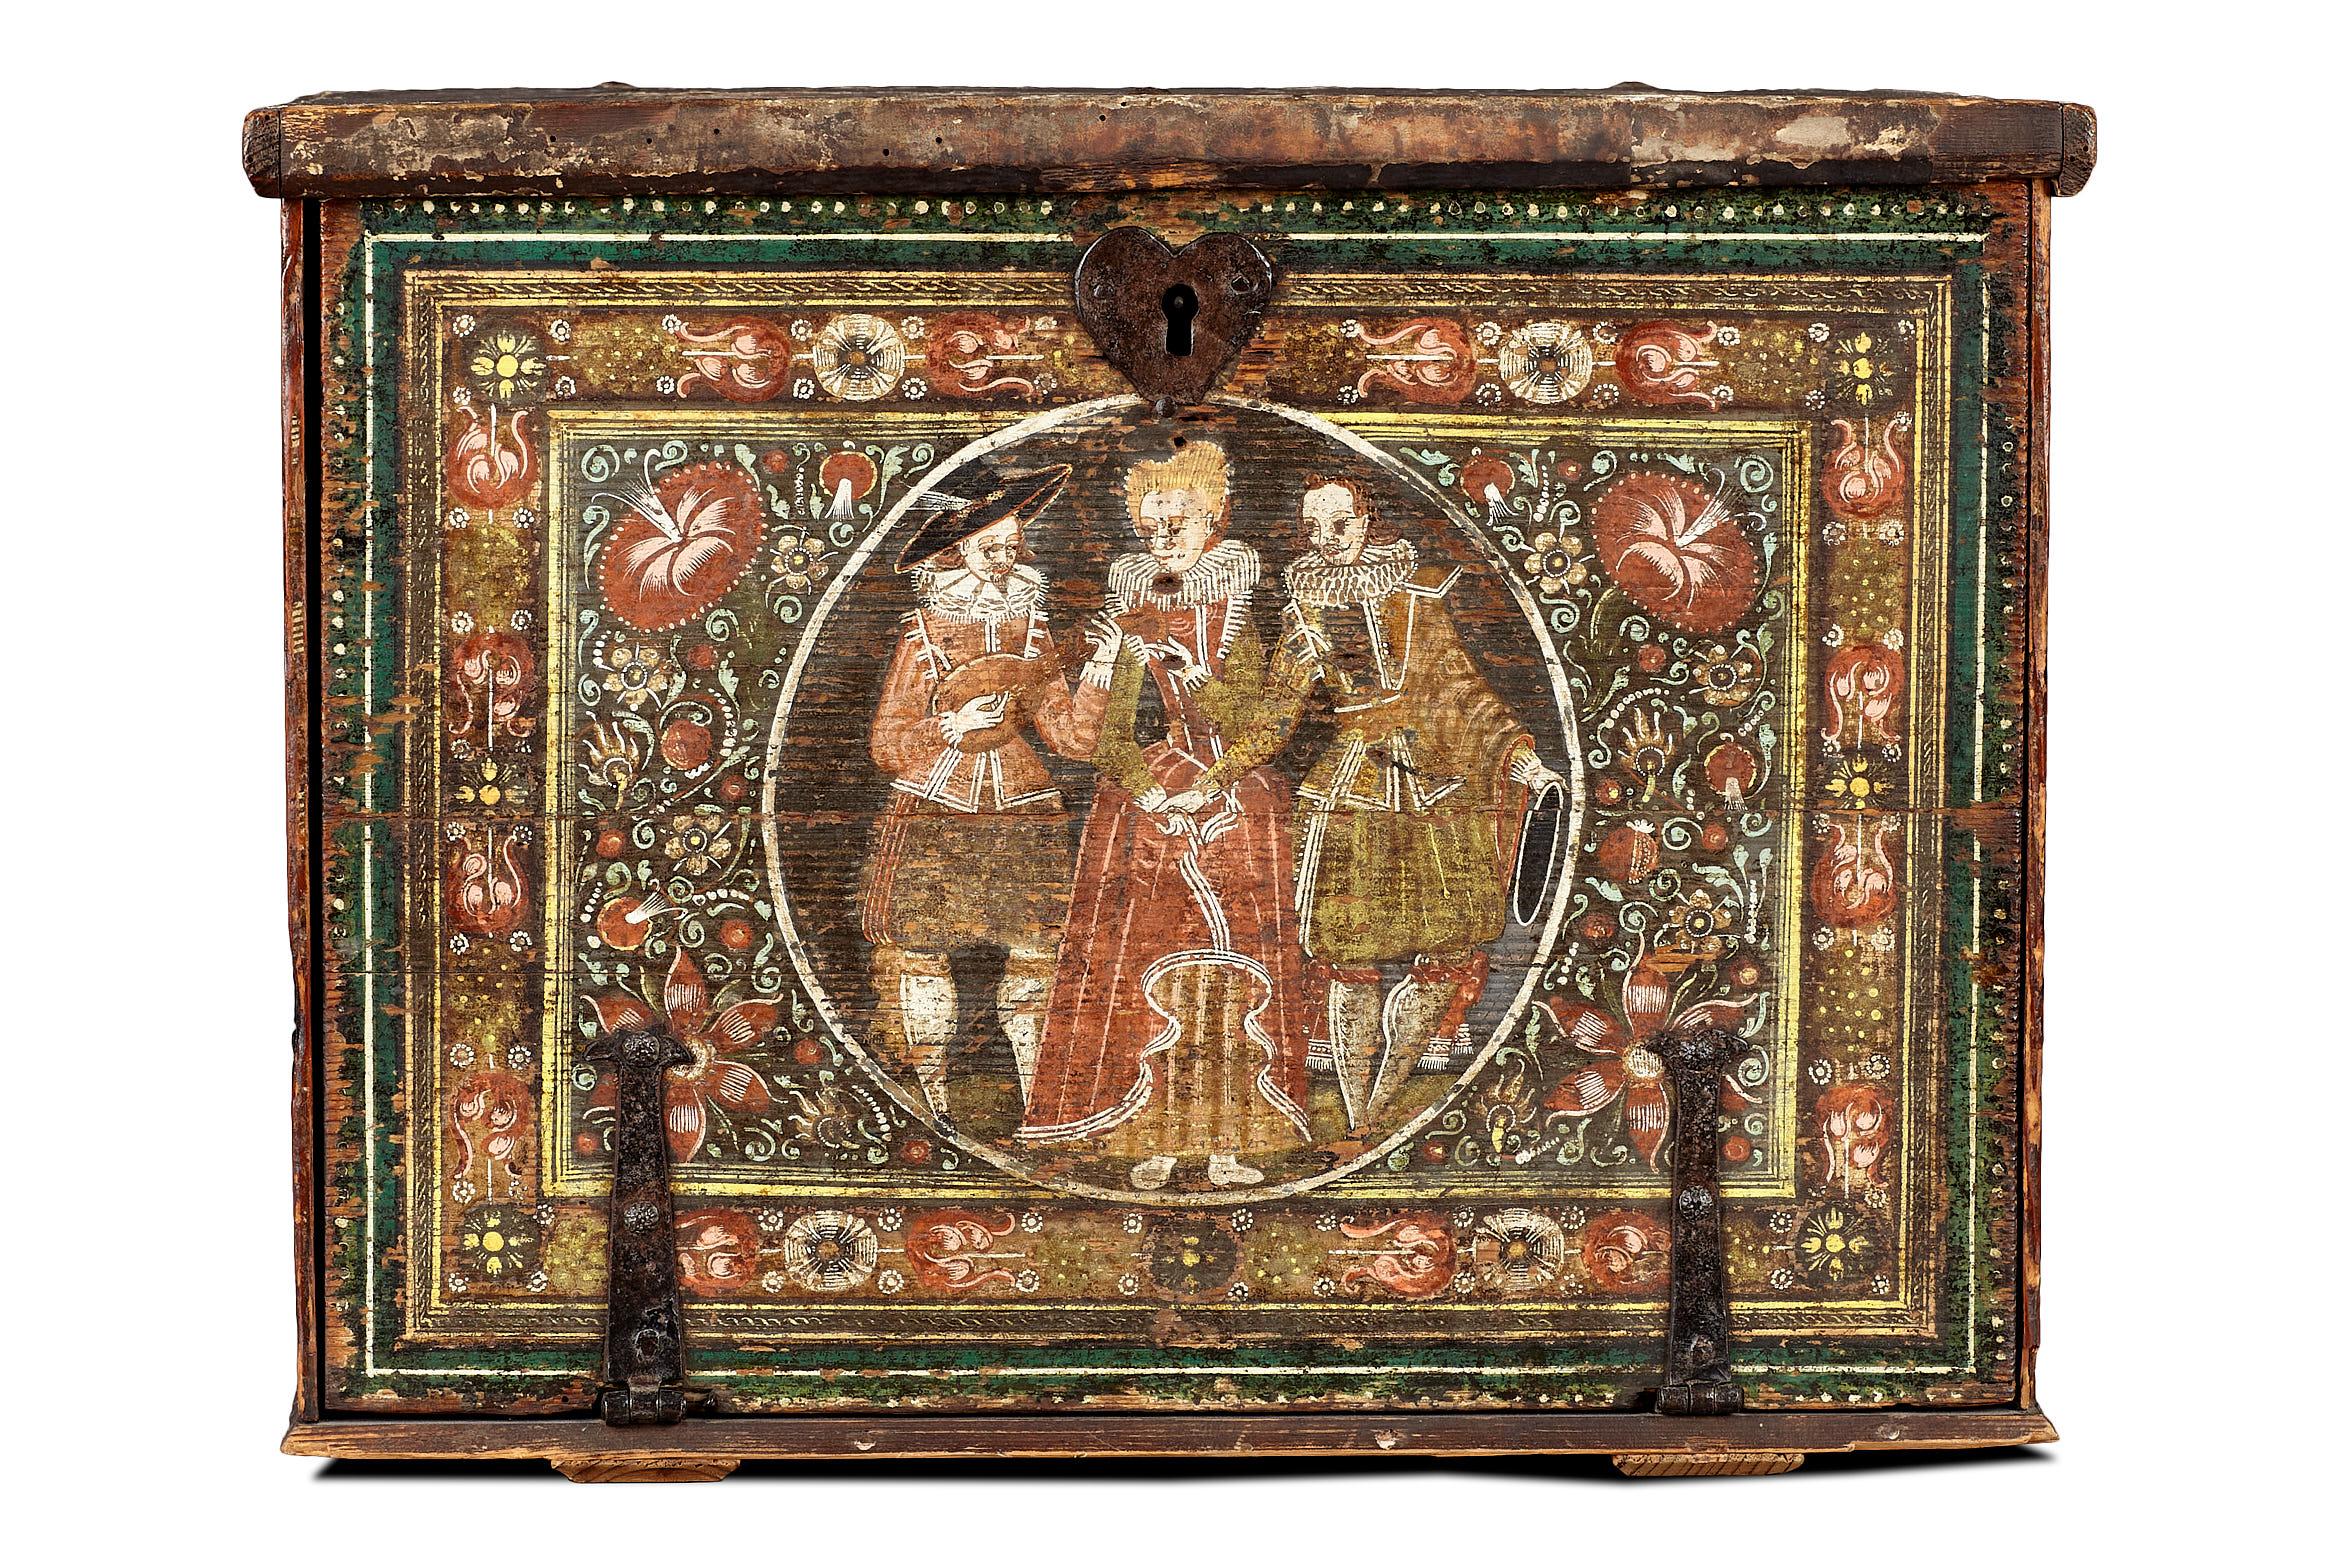 Elizabethan polychrome marriage cabinet, German, circa 1580-1600

The pine and polychrome table or marriage cabinet, decorated in 'Wismuth Maleri' - literally meaning 'Wismuth' or 'Bismuth' white polychrome paint laid on a delicate fabric ground